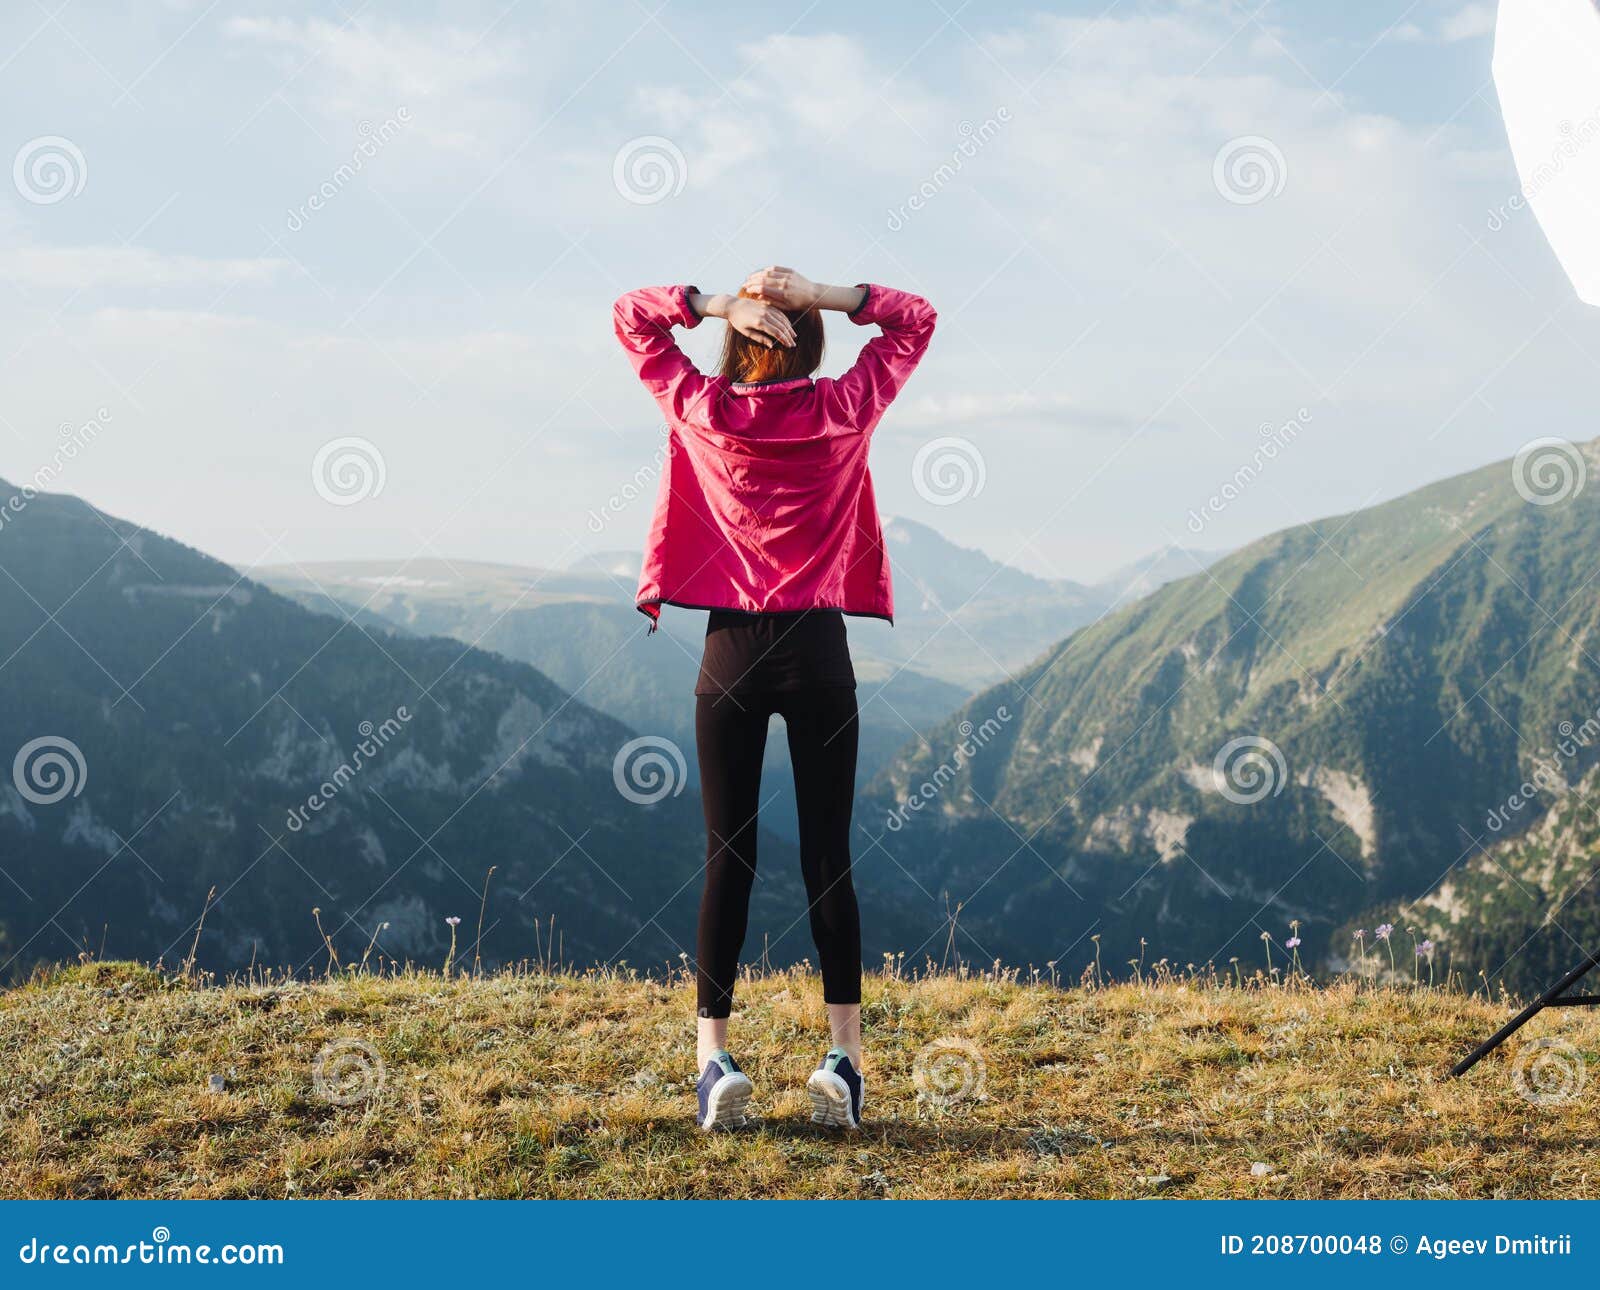 a traveler in leggings, sneakers and a jacket are resting in the mountains in nature